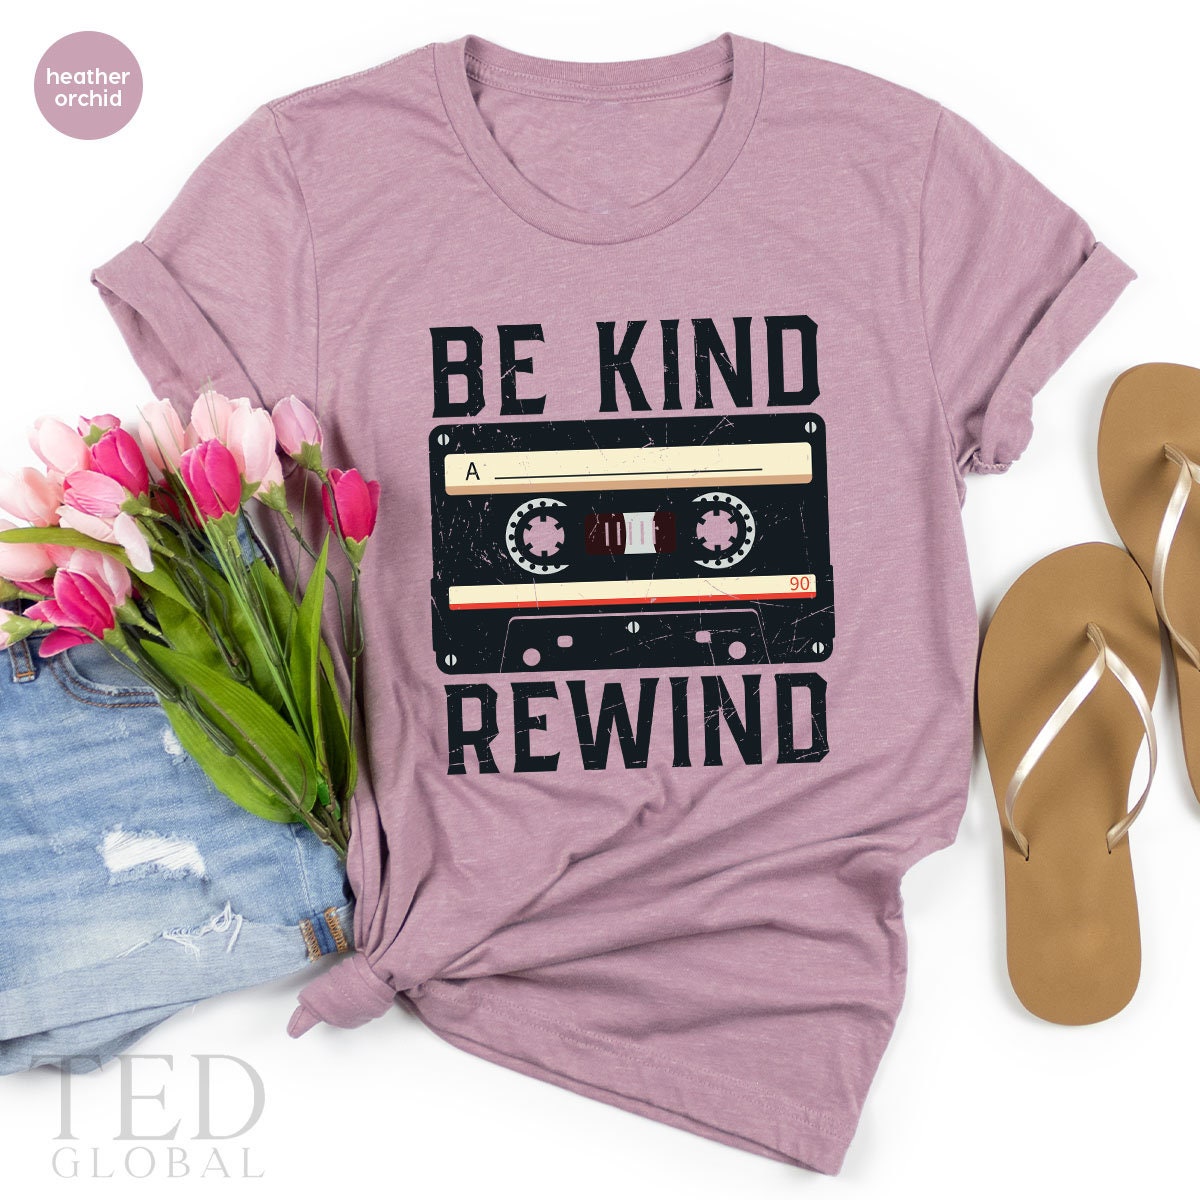 Be Kind Rewind Vintage T-Shirt, Vintage 80-90 TShirt, Tape Recorder Tee, Be Kind Shirts, 80-90 Years Historical Shirt, Gift For Historical - Fastdeliverytees.com